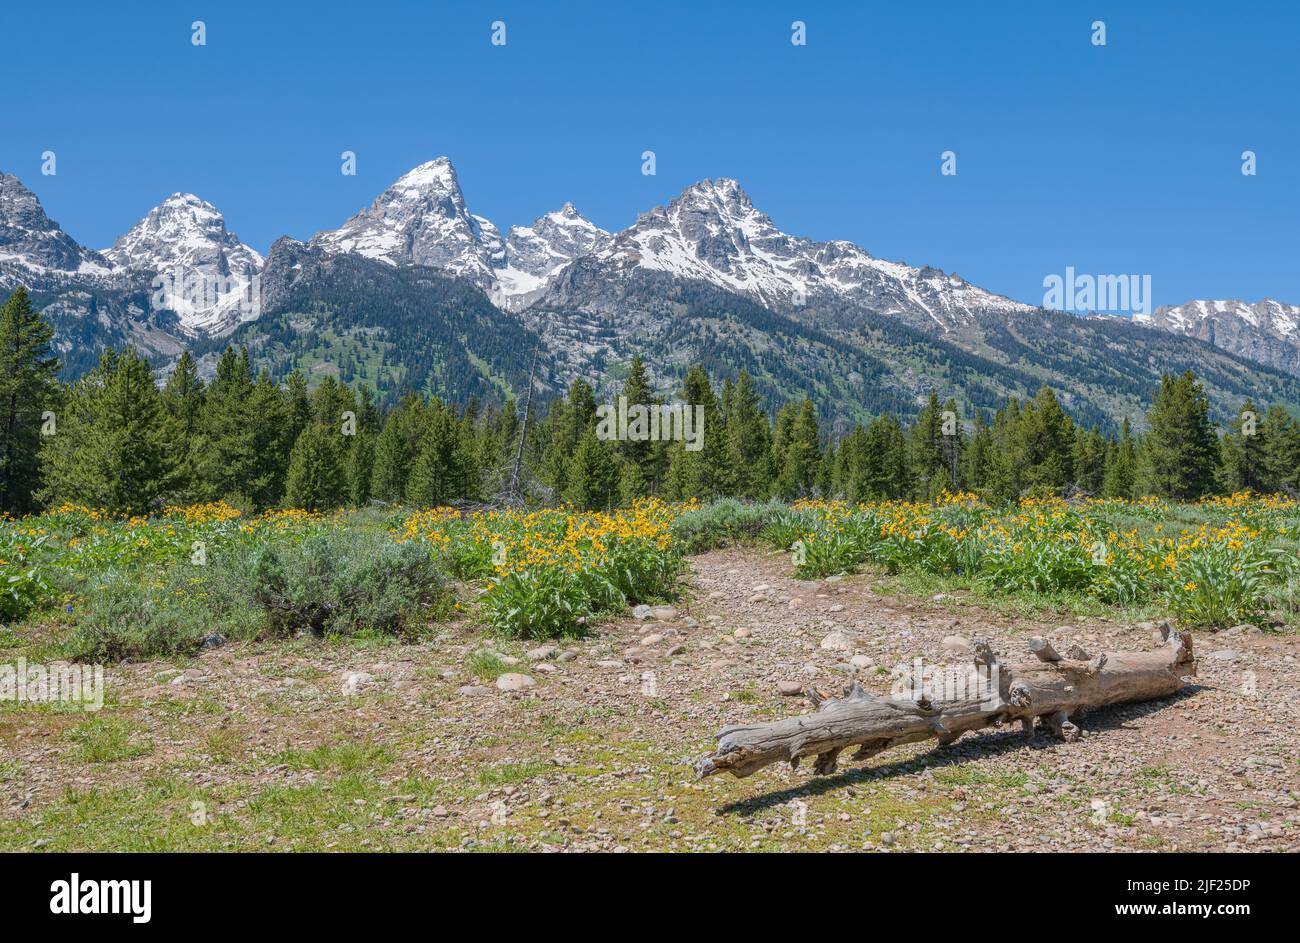 The Tetons viewpoint and landscape in Wyoming state. Stock Photo